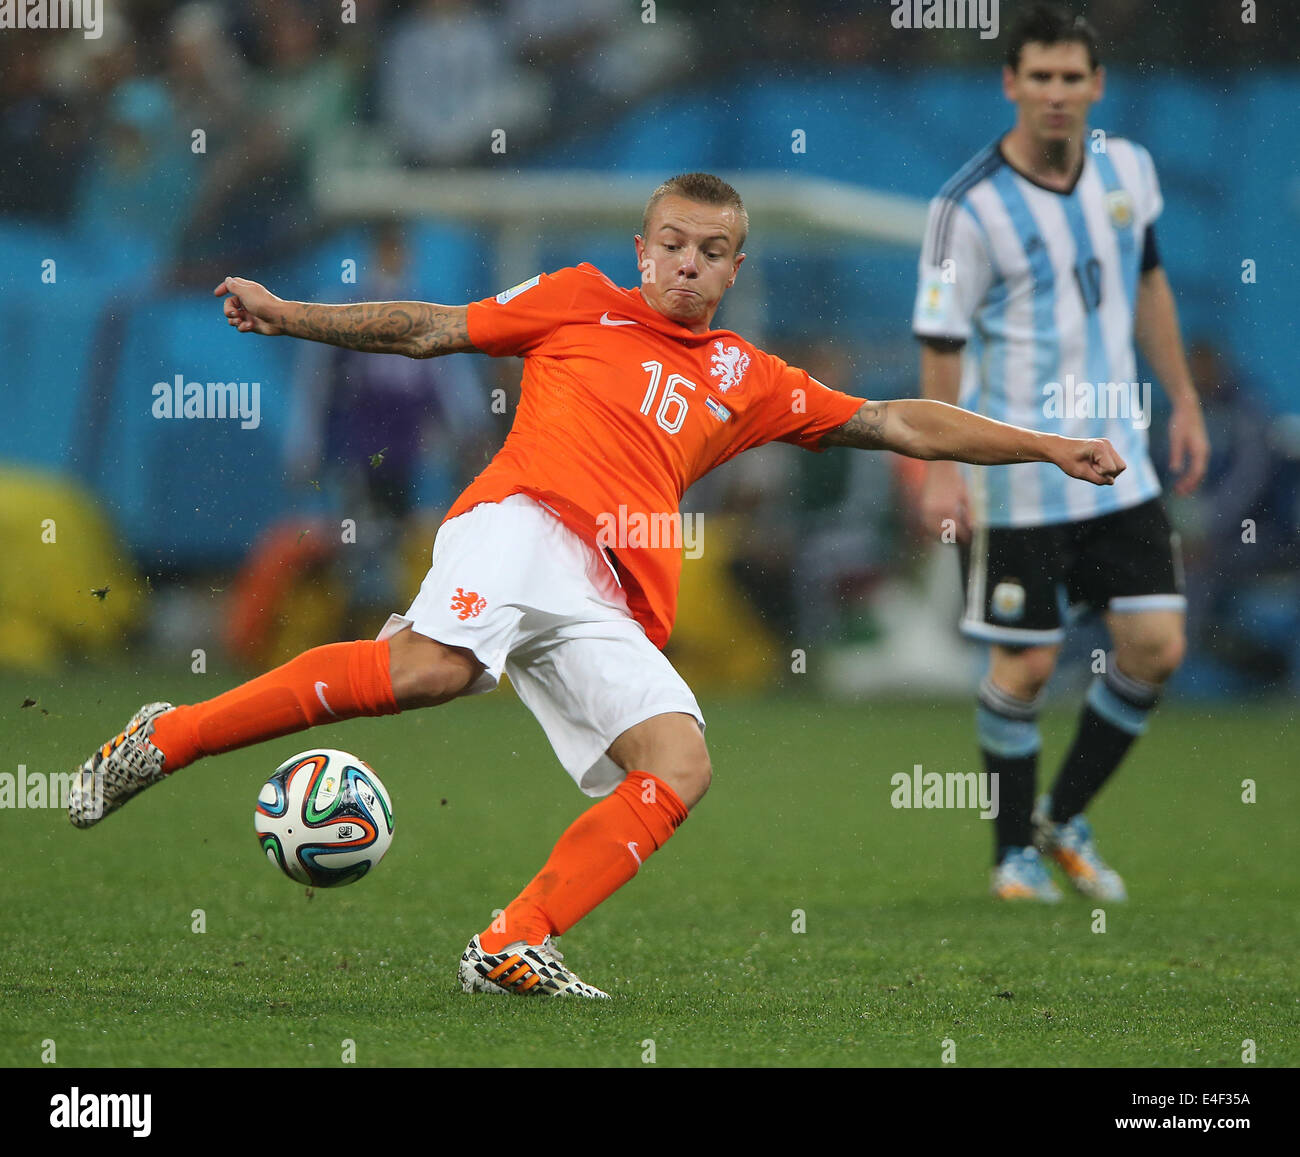 Sao Paulo, Brazil. 9th July, 2014. Netherlands' Jordy Clasie controls the ball during a semifinal match between Netherlands and Argentina of 2014 FIFA World Cup at the Arena de Sao Paulo Stadium in Sao Paulo, Brazil, on July 9, 2014. Credit:  Zhou Lei/Xinhua/Alamy Live News Stock Photo